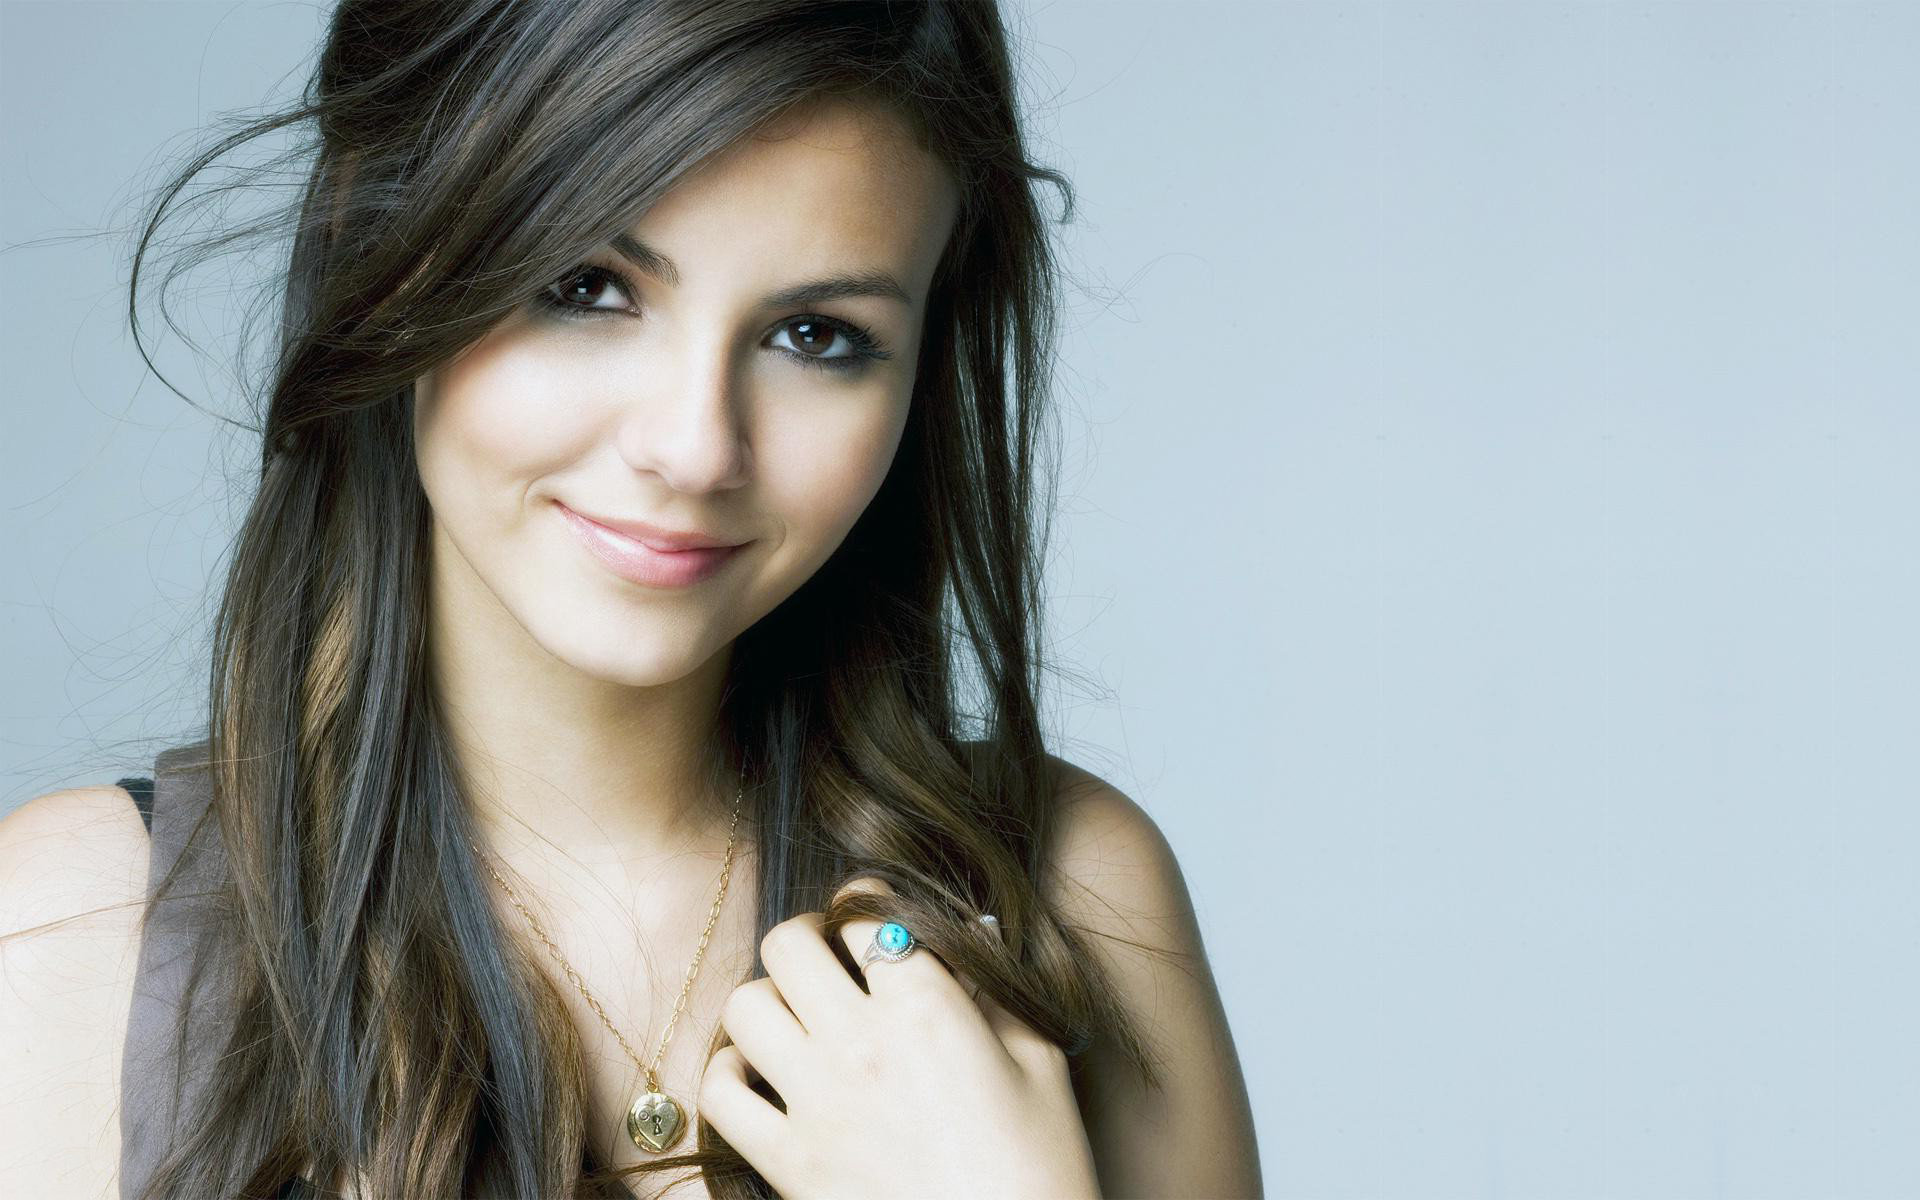 Free Victoria Justice high quality wallpaper ID:137140 for hd 1920x1200 desktop